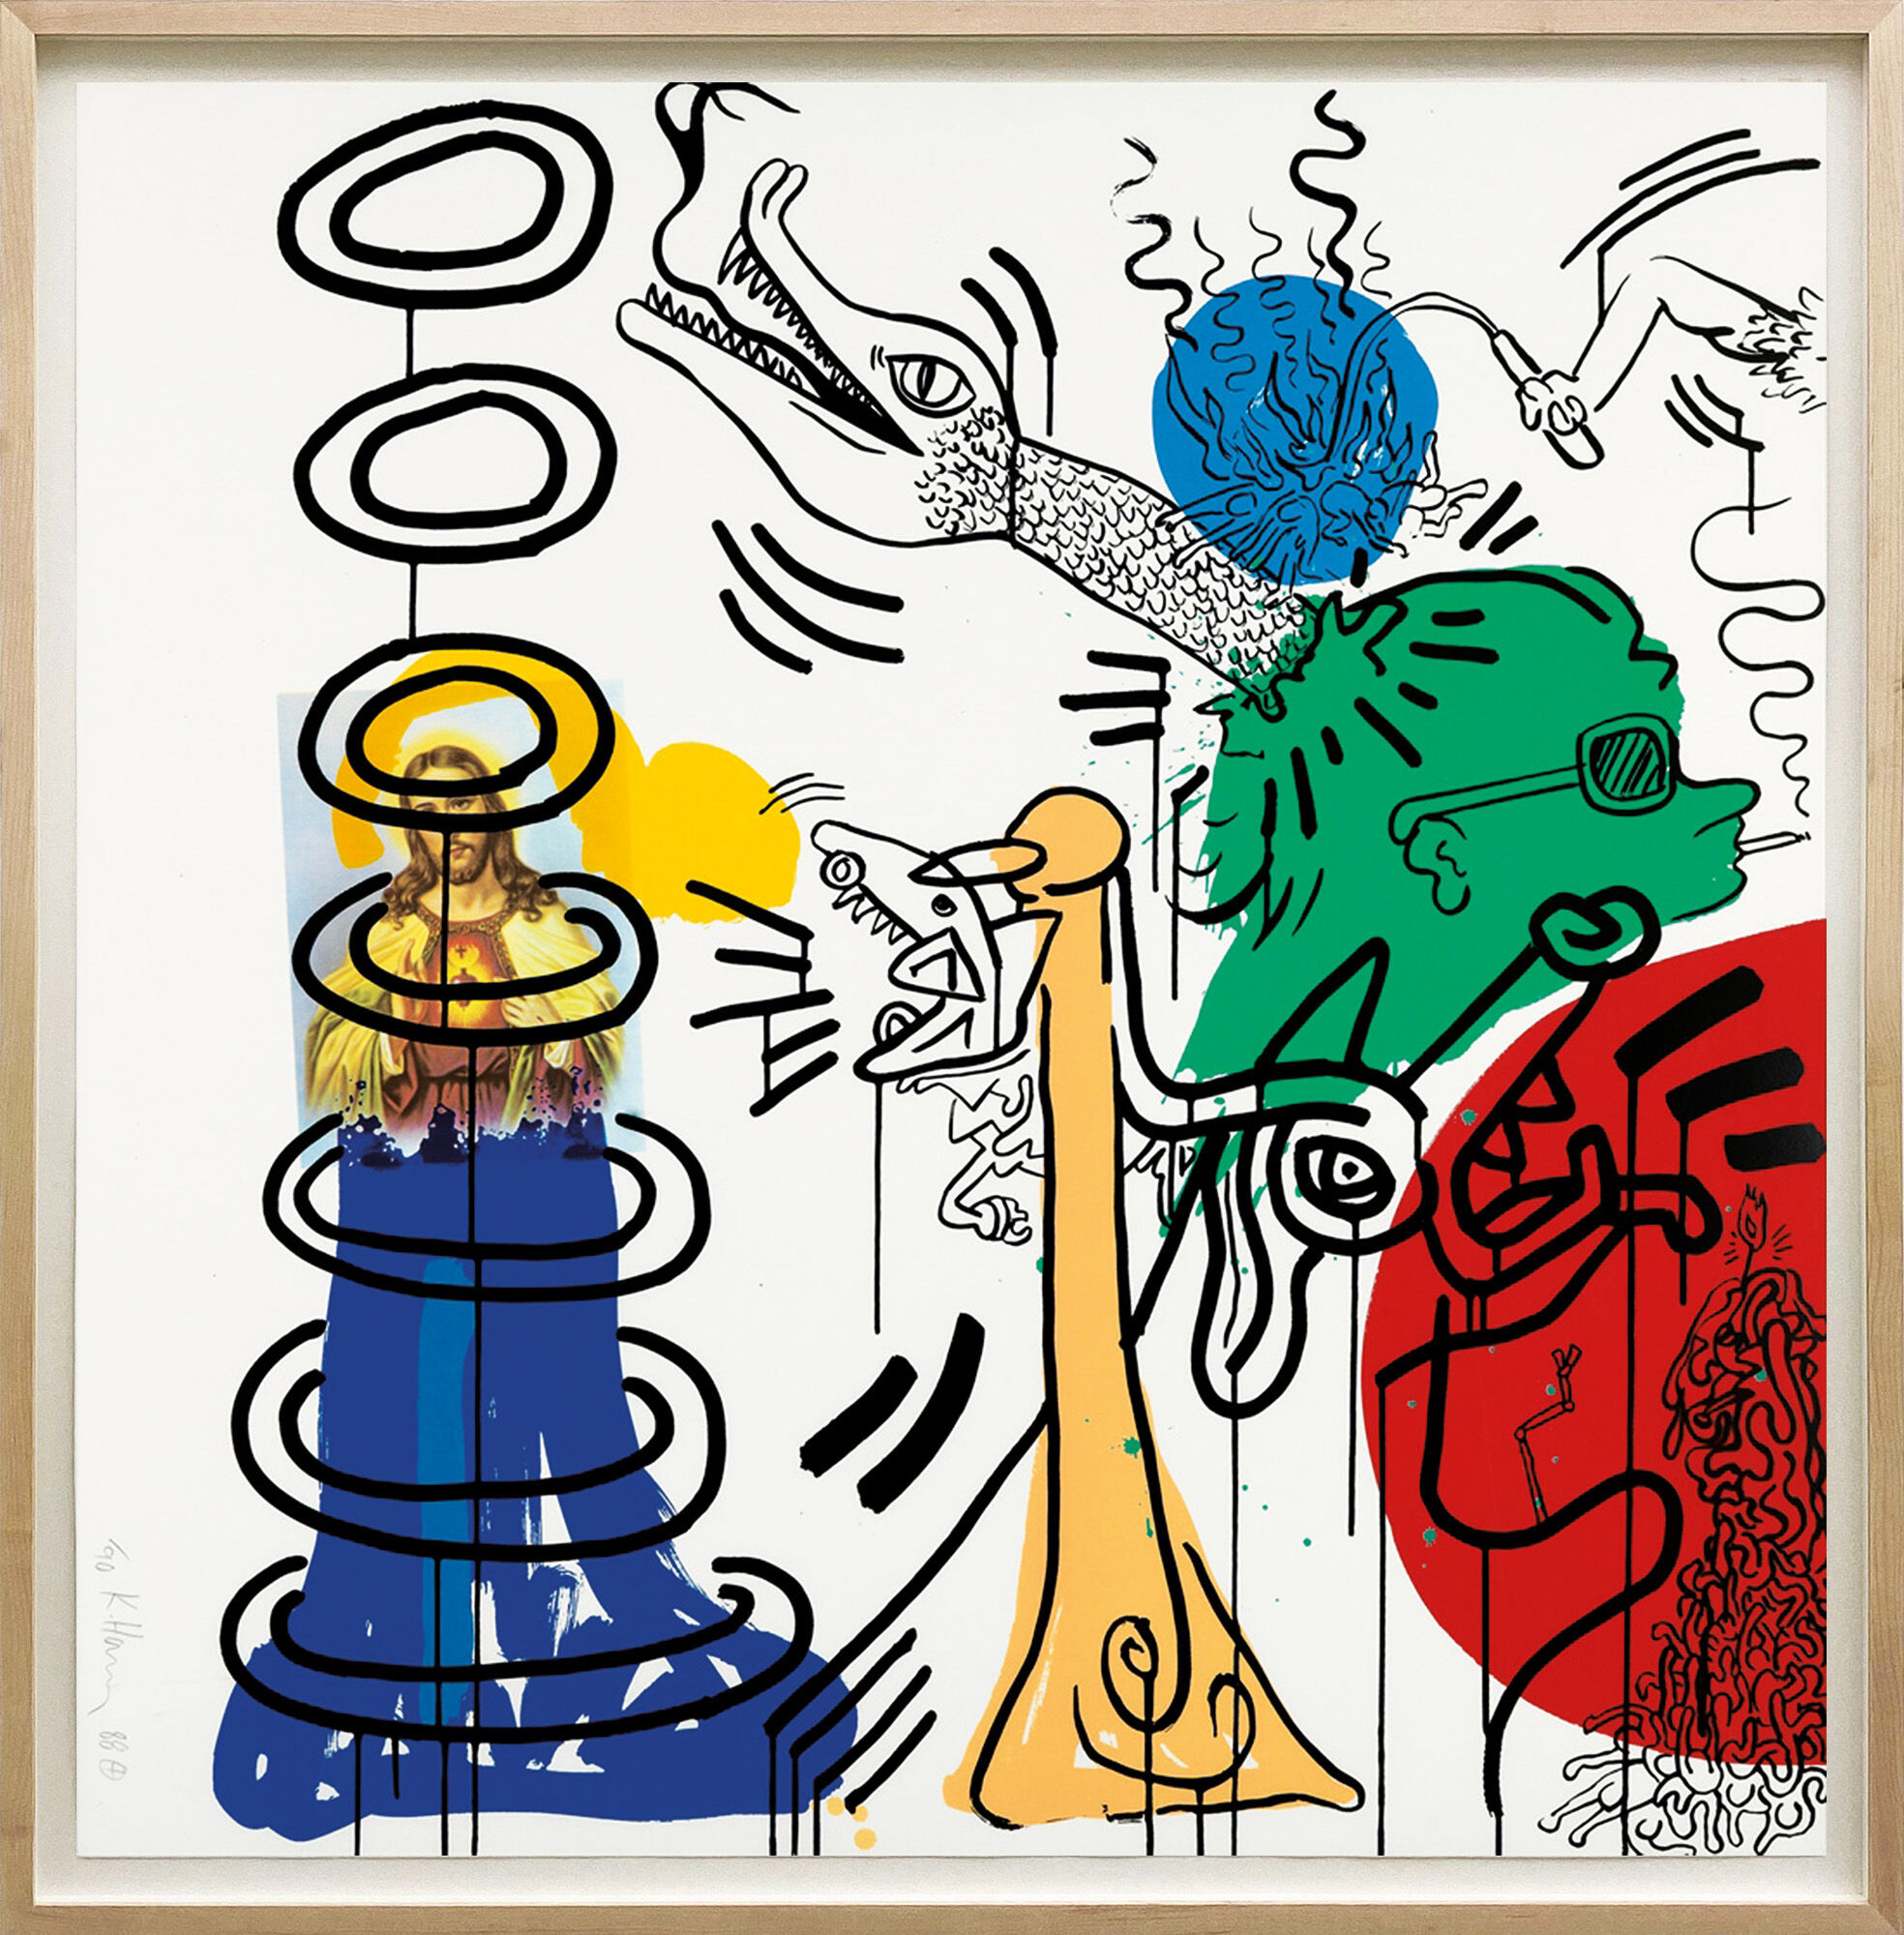 Picture "Apocalypse #5" (1988) by Keith Haring